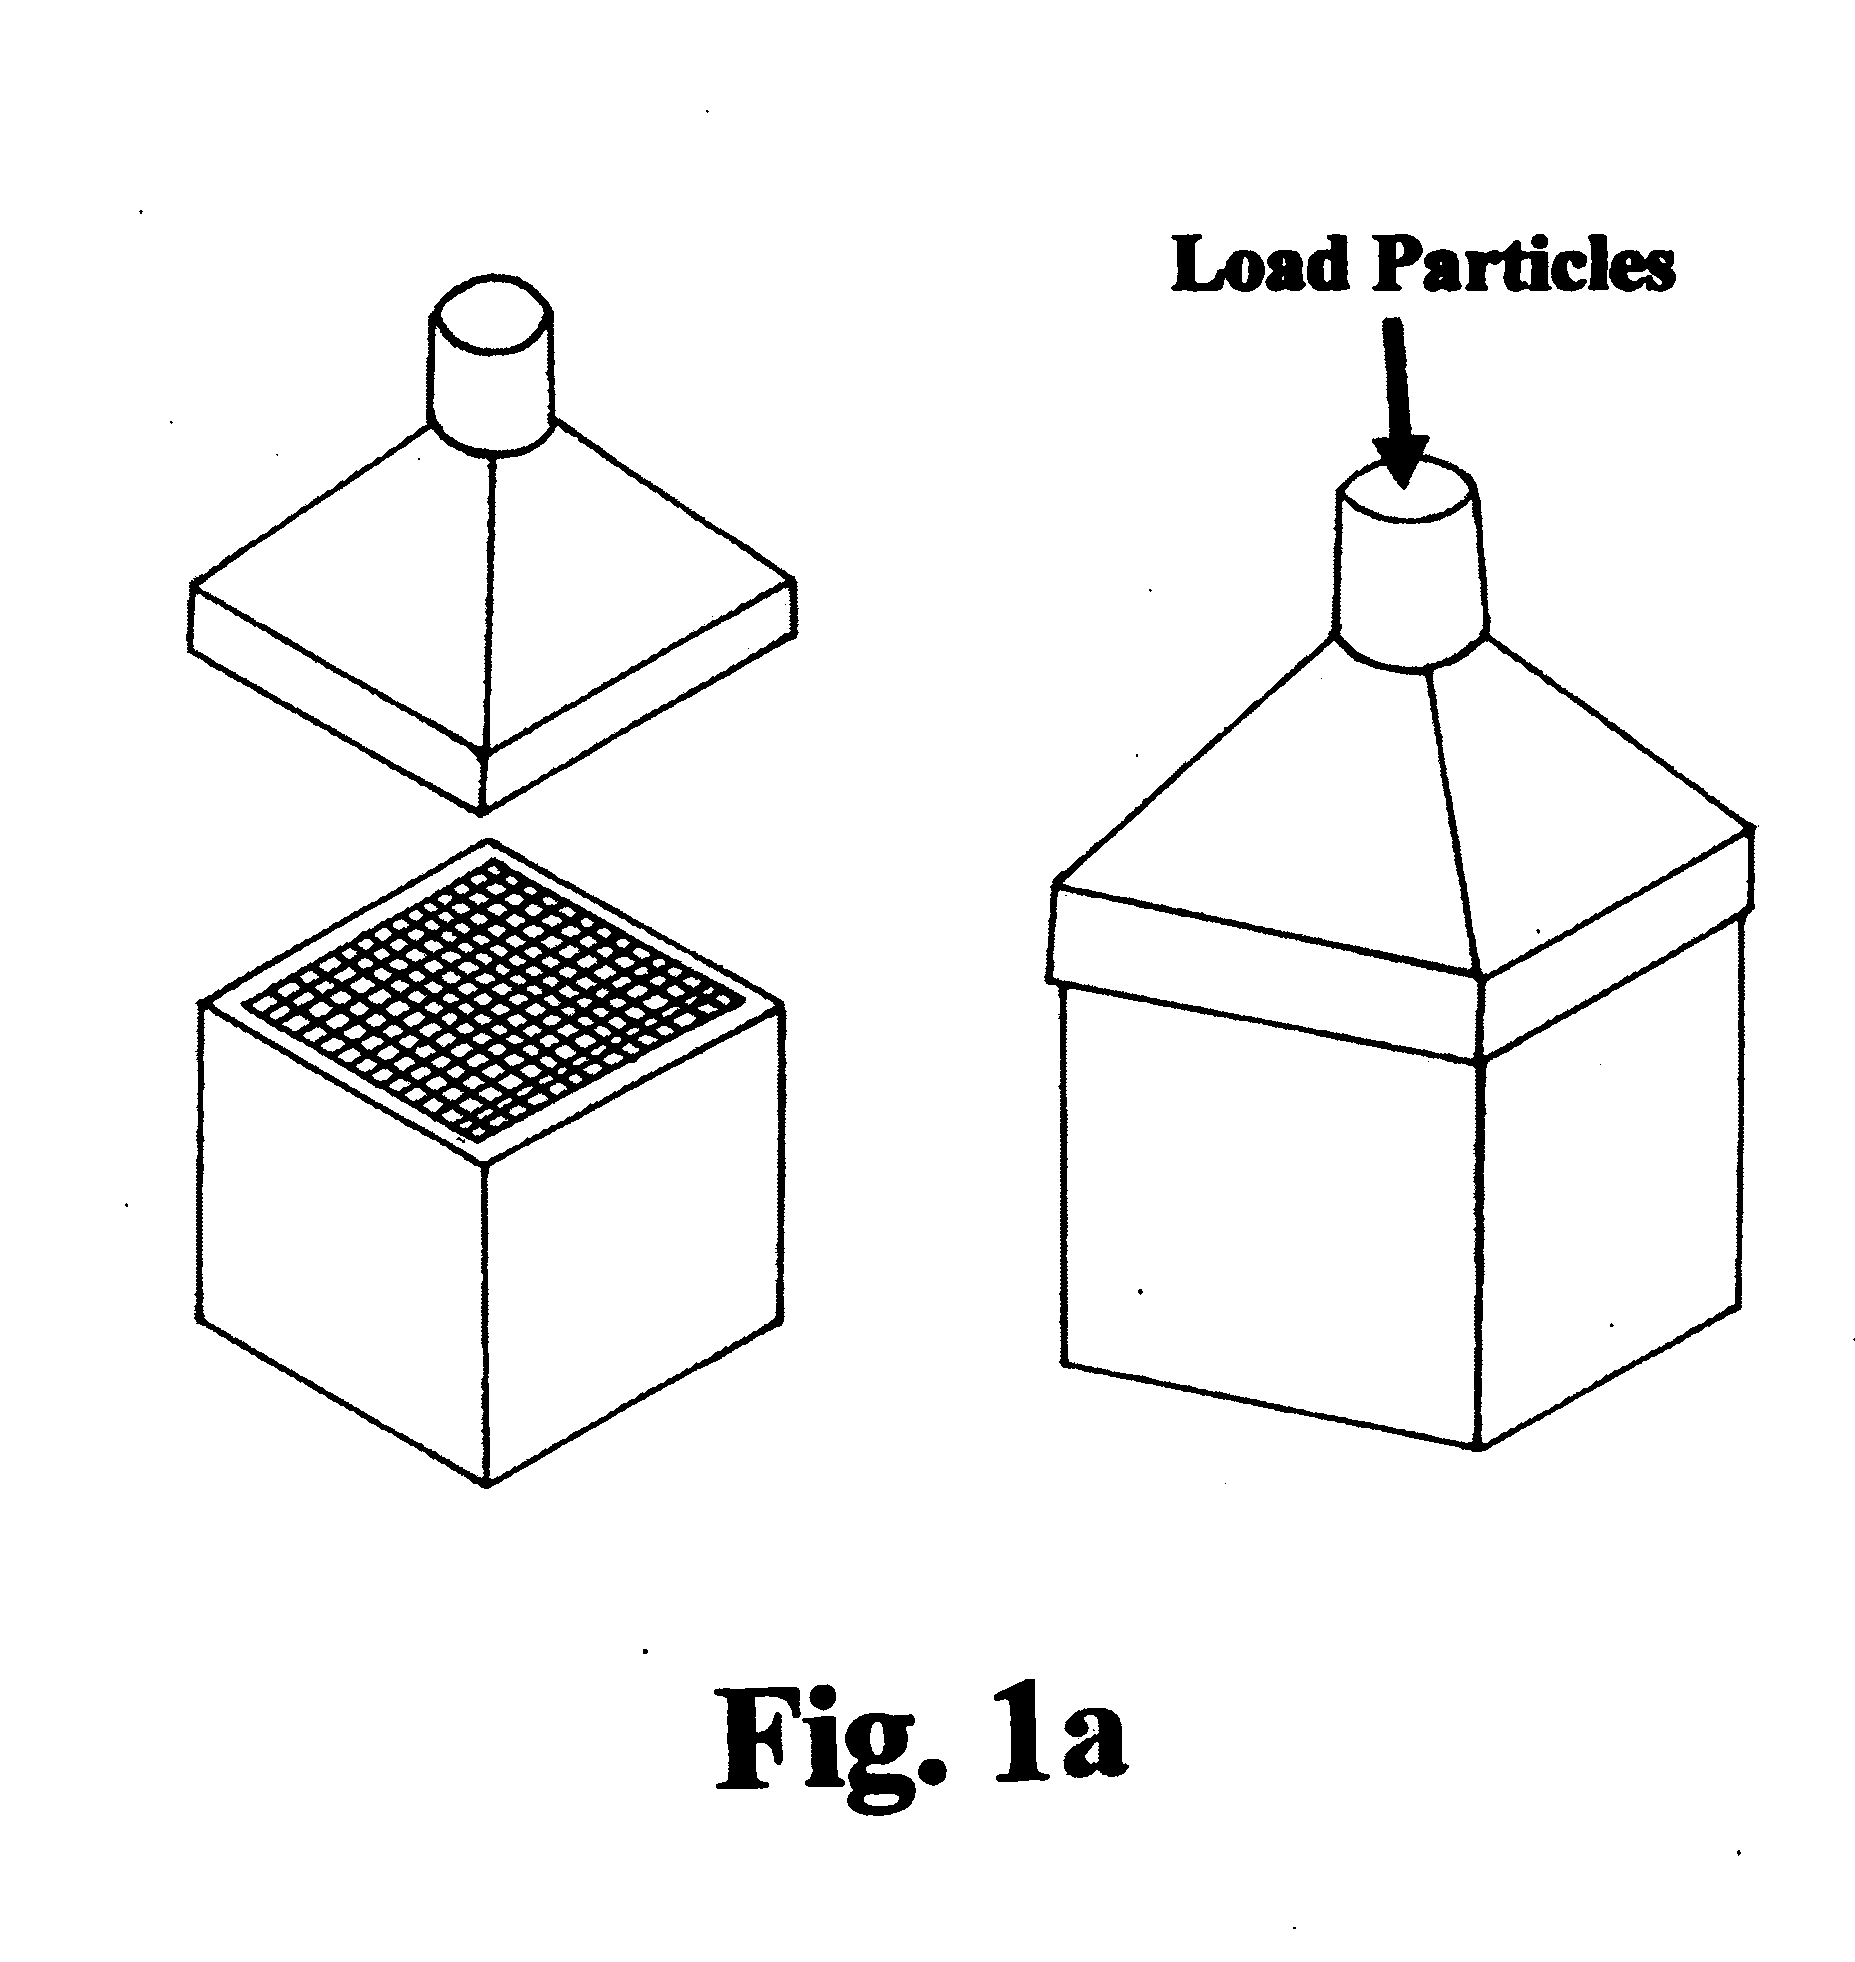 Loading/Unloading of Particulates to/from Microchannel Reactors